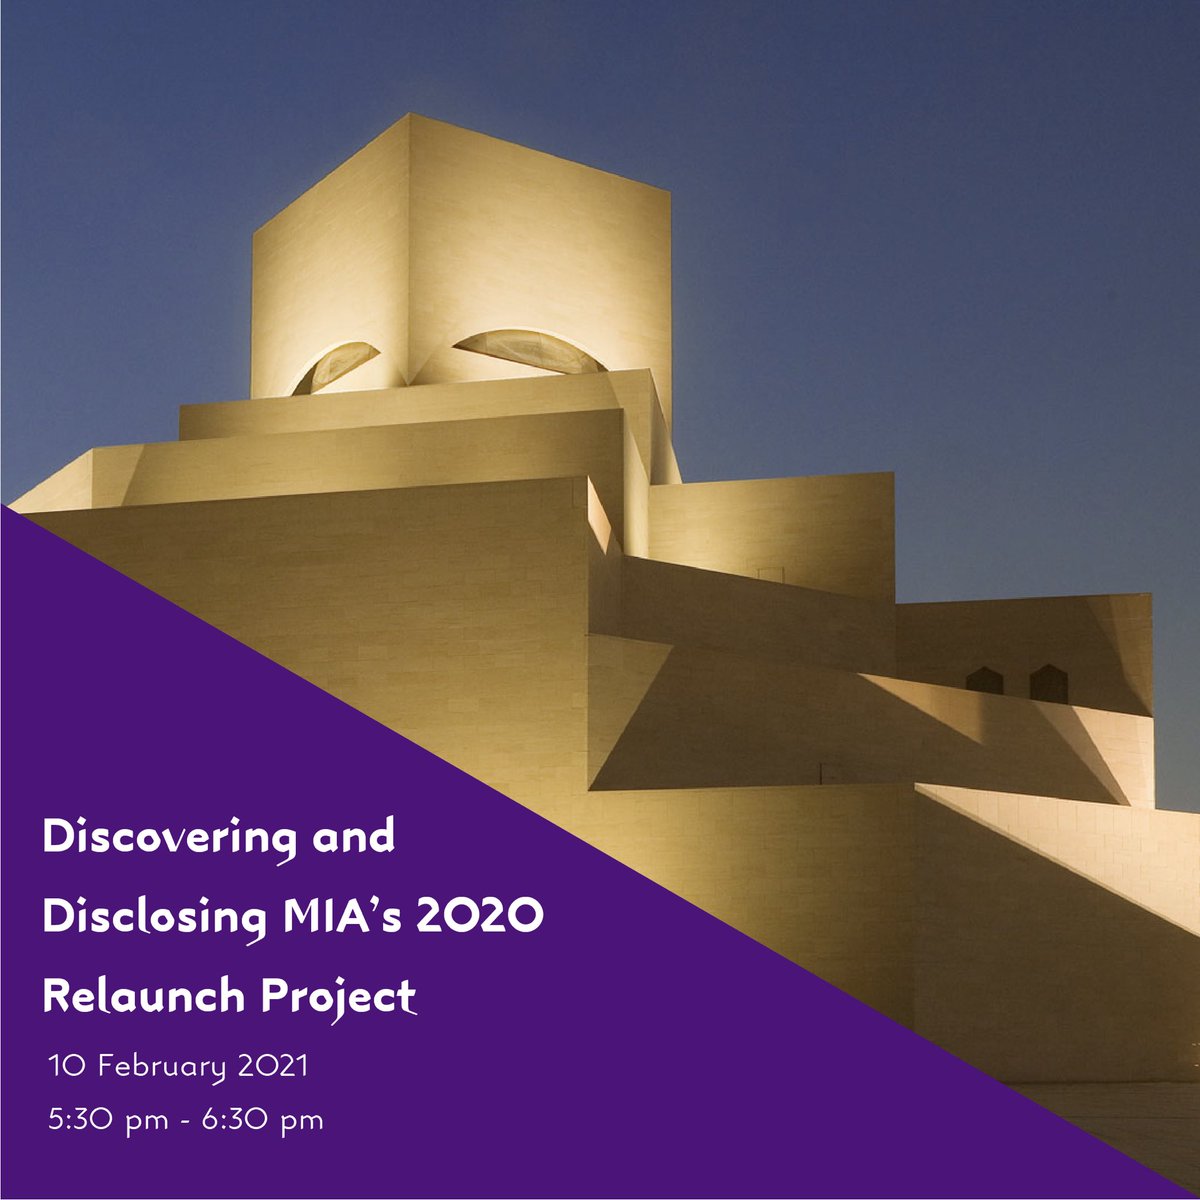 Wednesday, February 10th “Discovering and Disclosing MIA’s 2020 Relaunch Project”: a detailed look into the storylines and objects shaping the Museum’s largest renovation since its opening. Presentation and discussion with MIA curators.